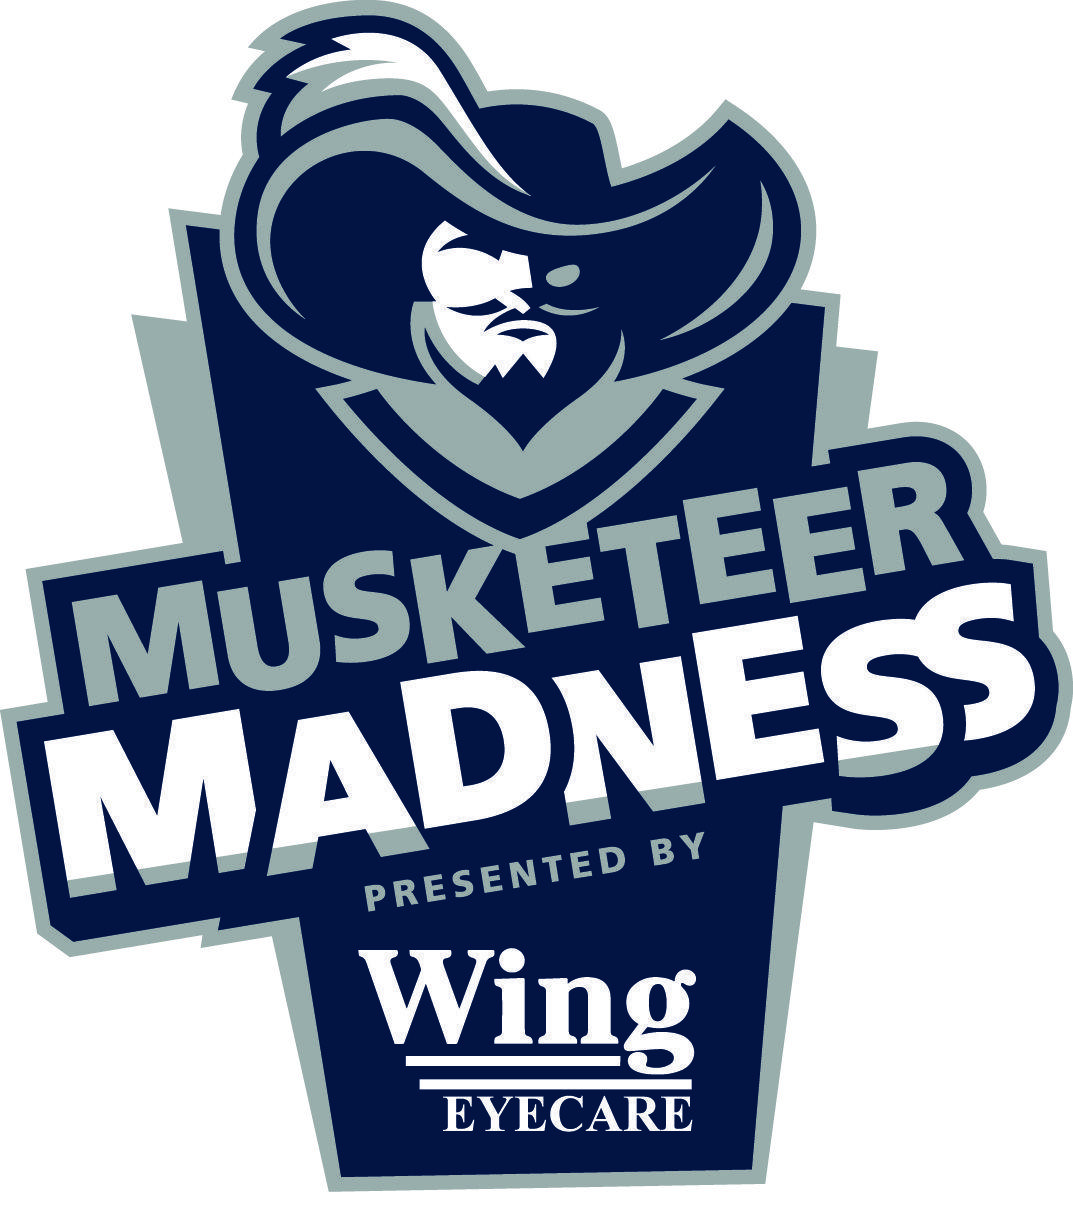 Madness Logo - Musketeer Madness presented by Wing Eyecare - Xavier University ...